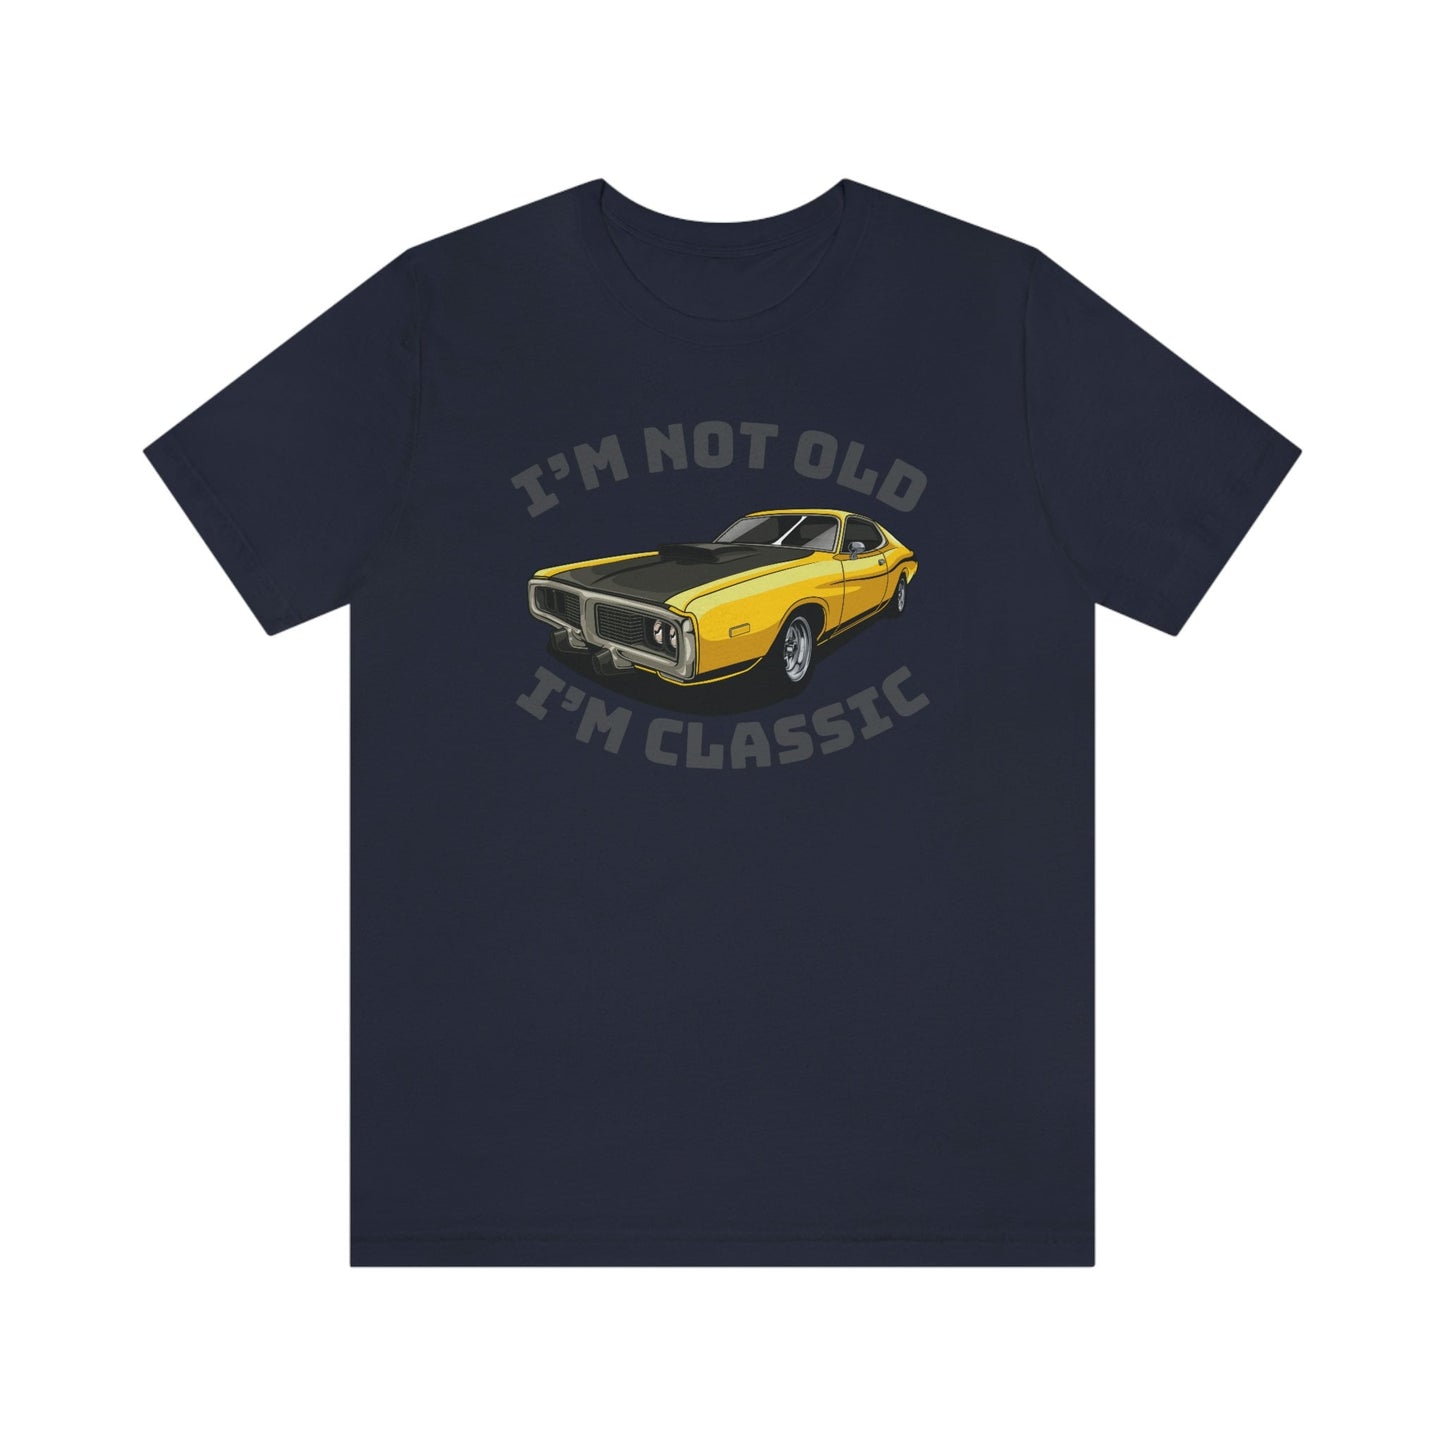 I'm not Old I'm Classic Gift t-shirt for men or women, Amazing Birthday for vehicle addicts and piston heads - 37 Design Unit